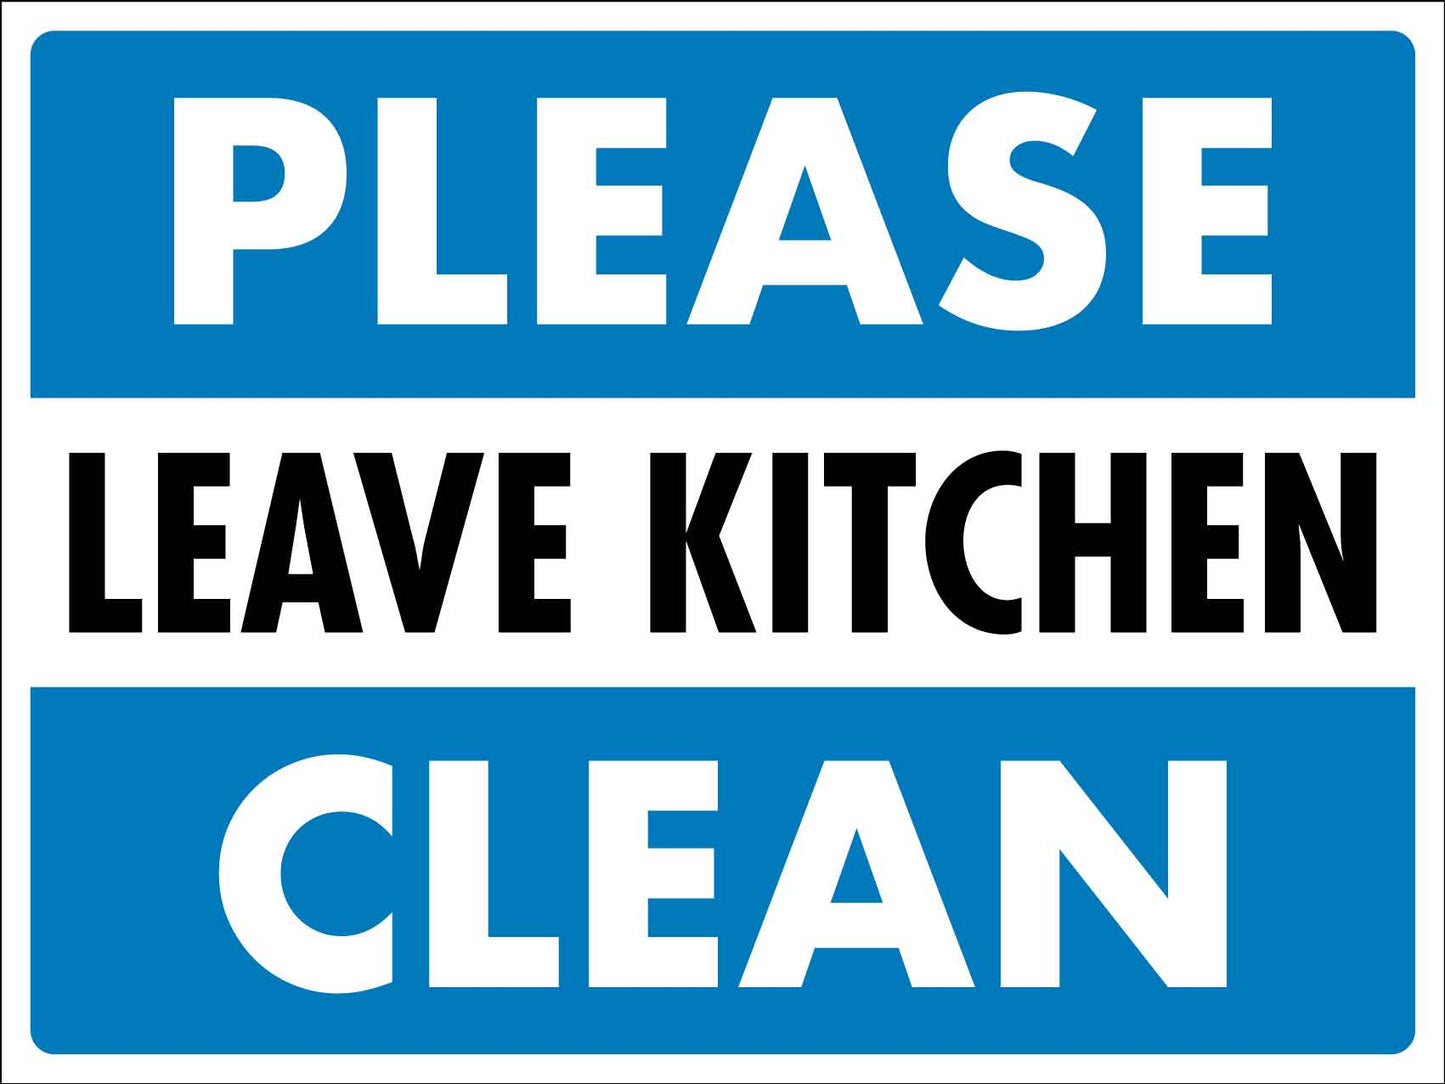 Please Leave Kitchen Clean Sign